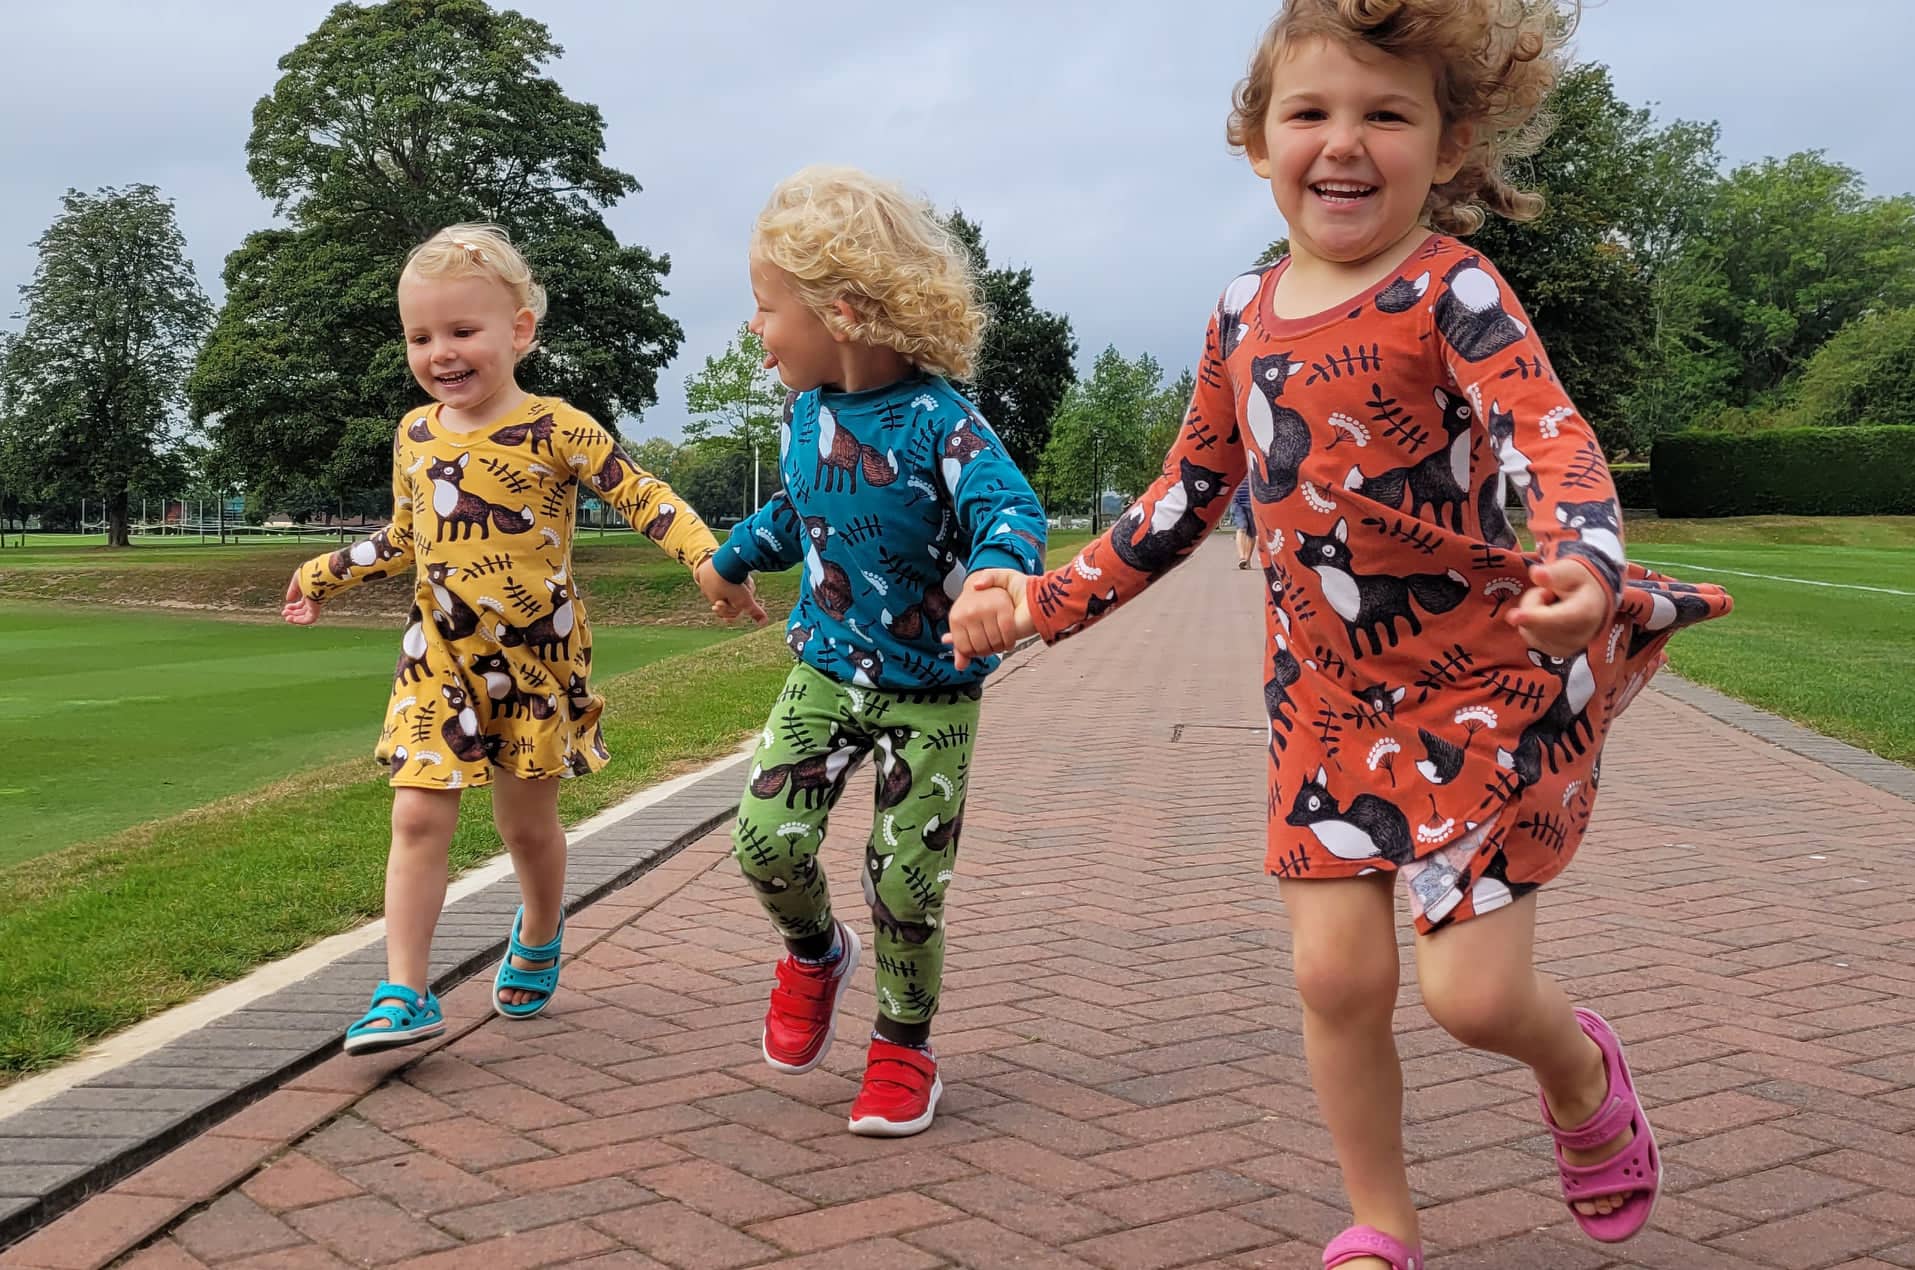 Zoe and Zack clothing on three young children running in a park